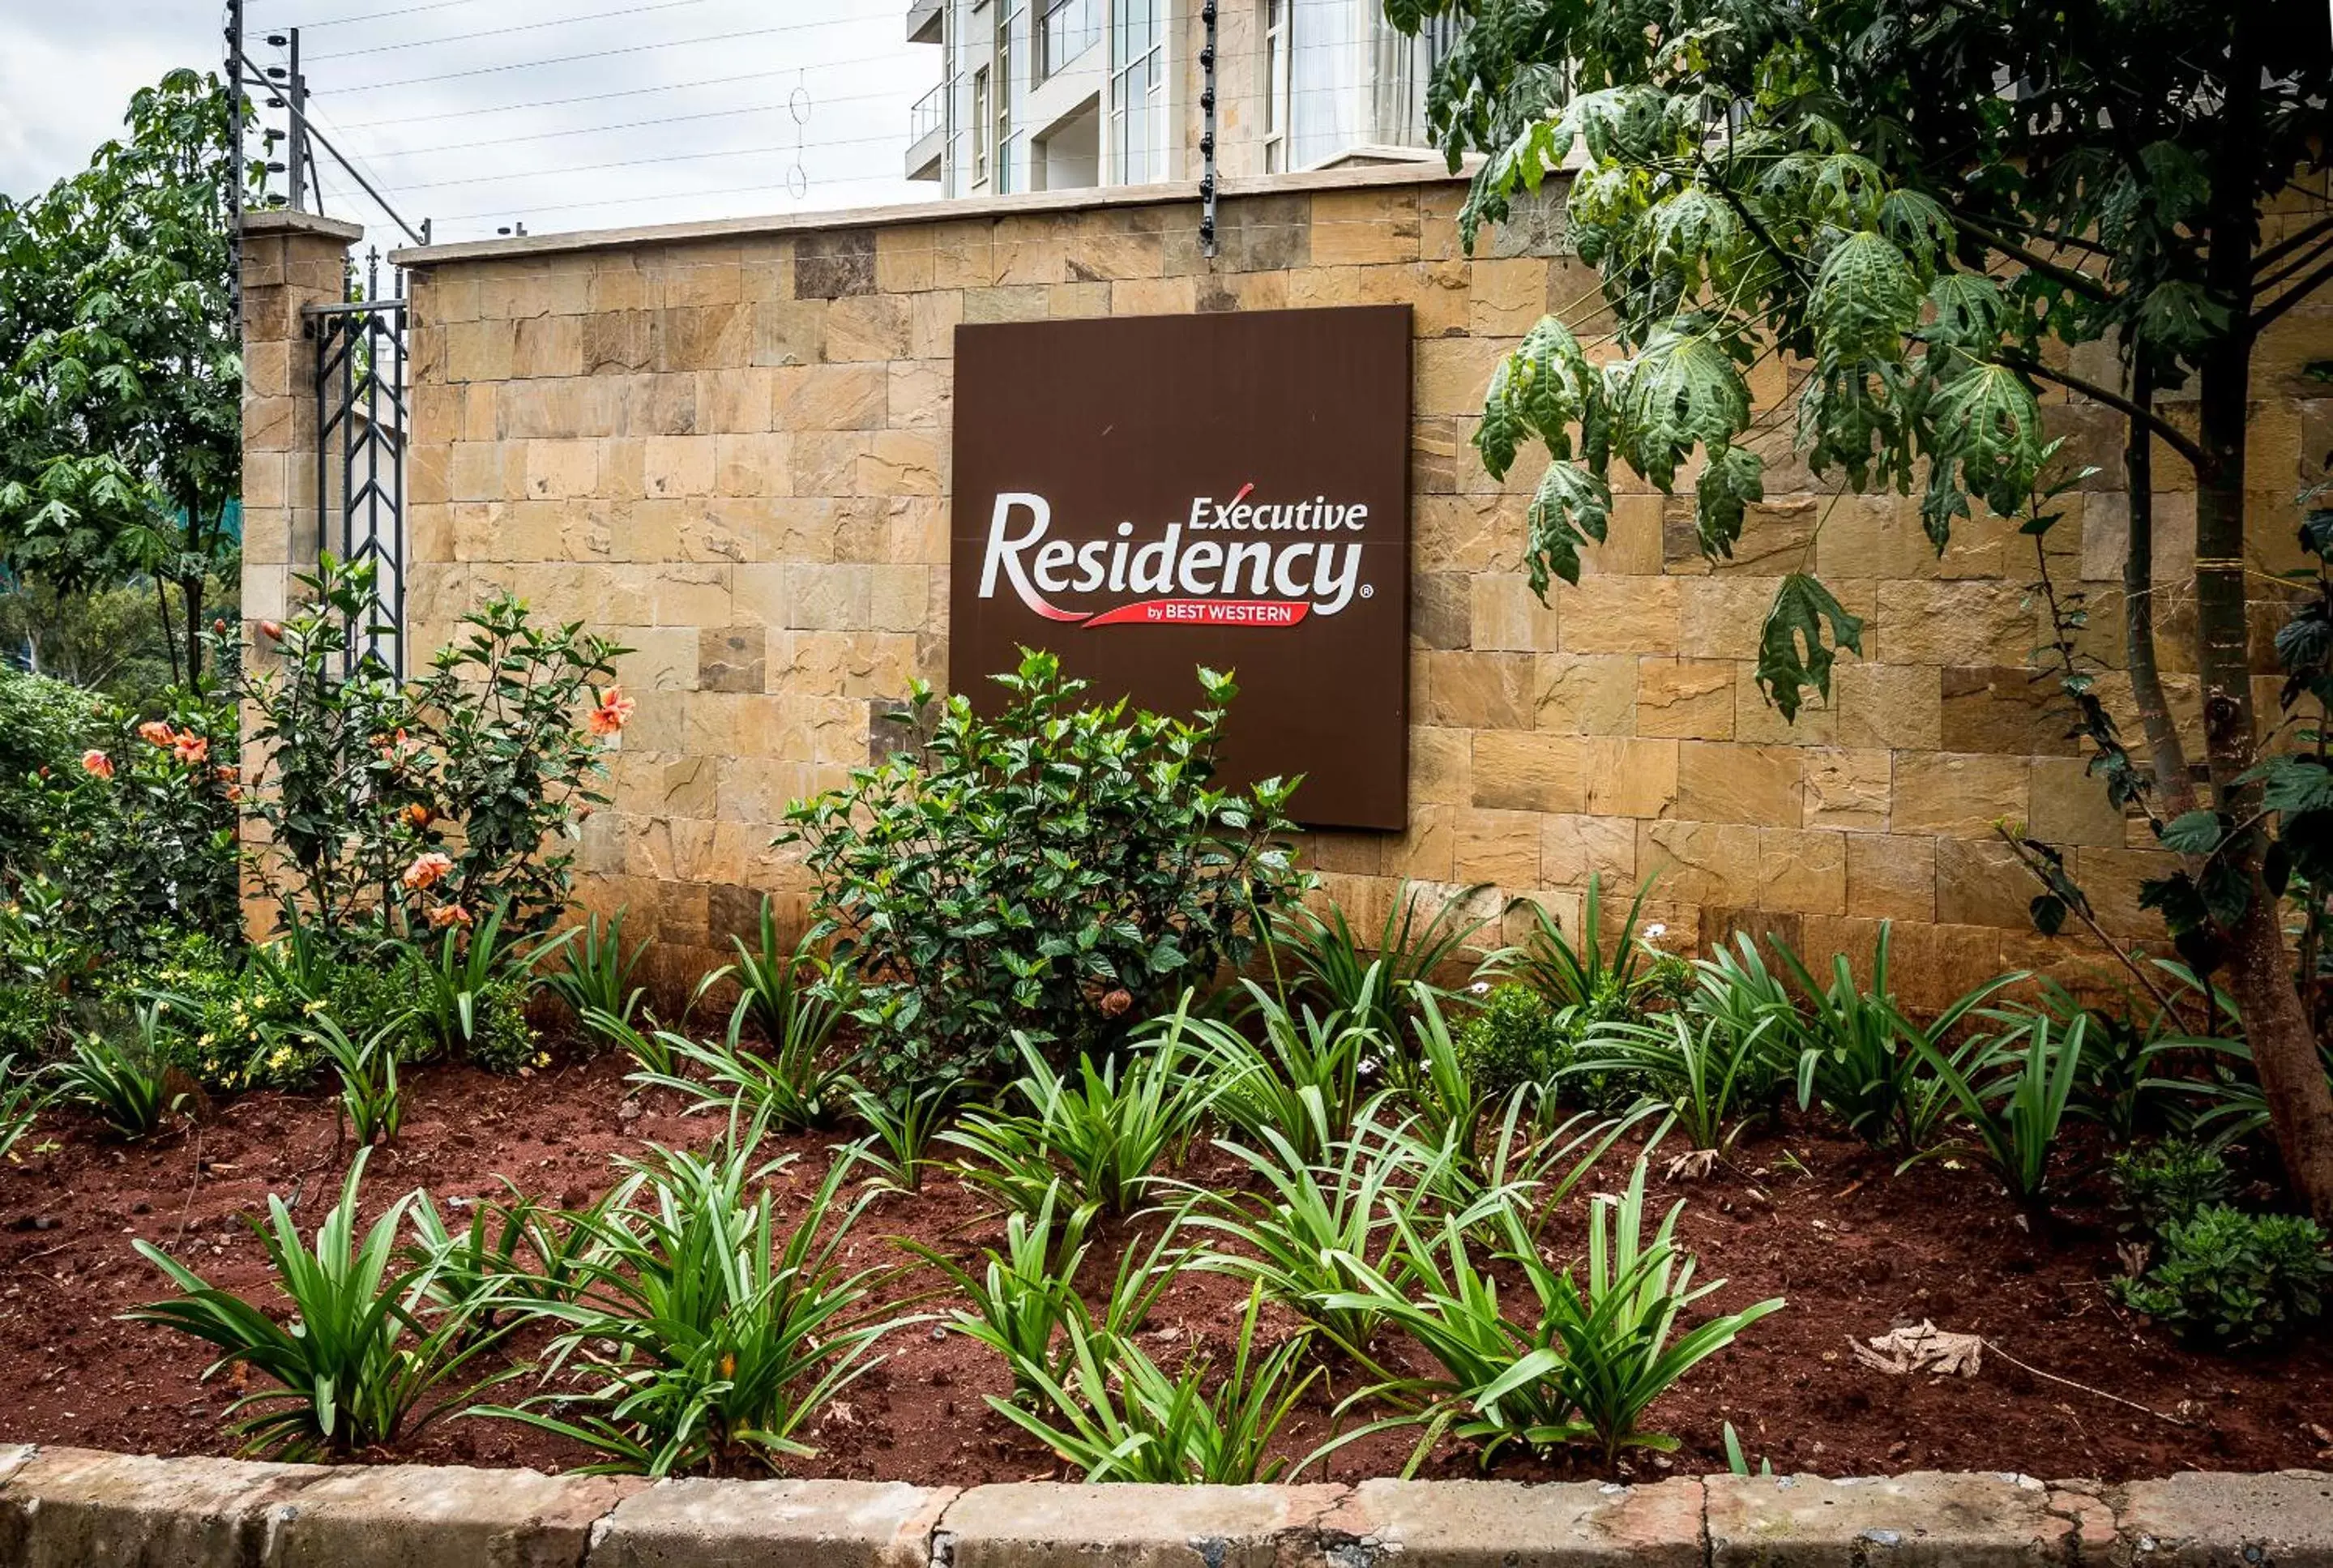 Property logo or sign in Executive Residency by Best Western Nairobi